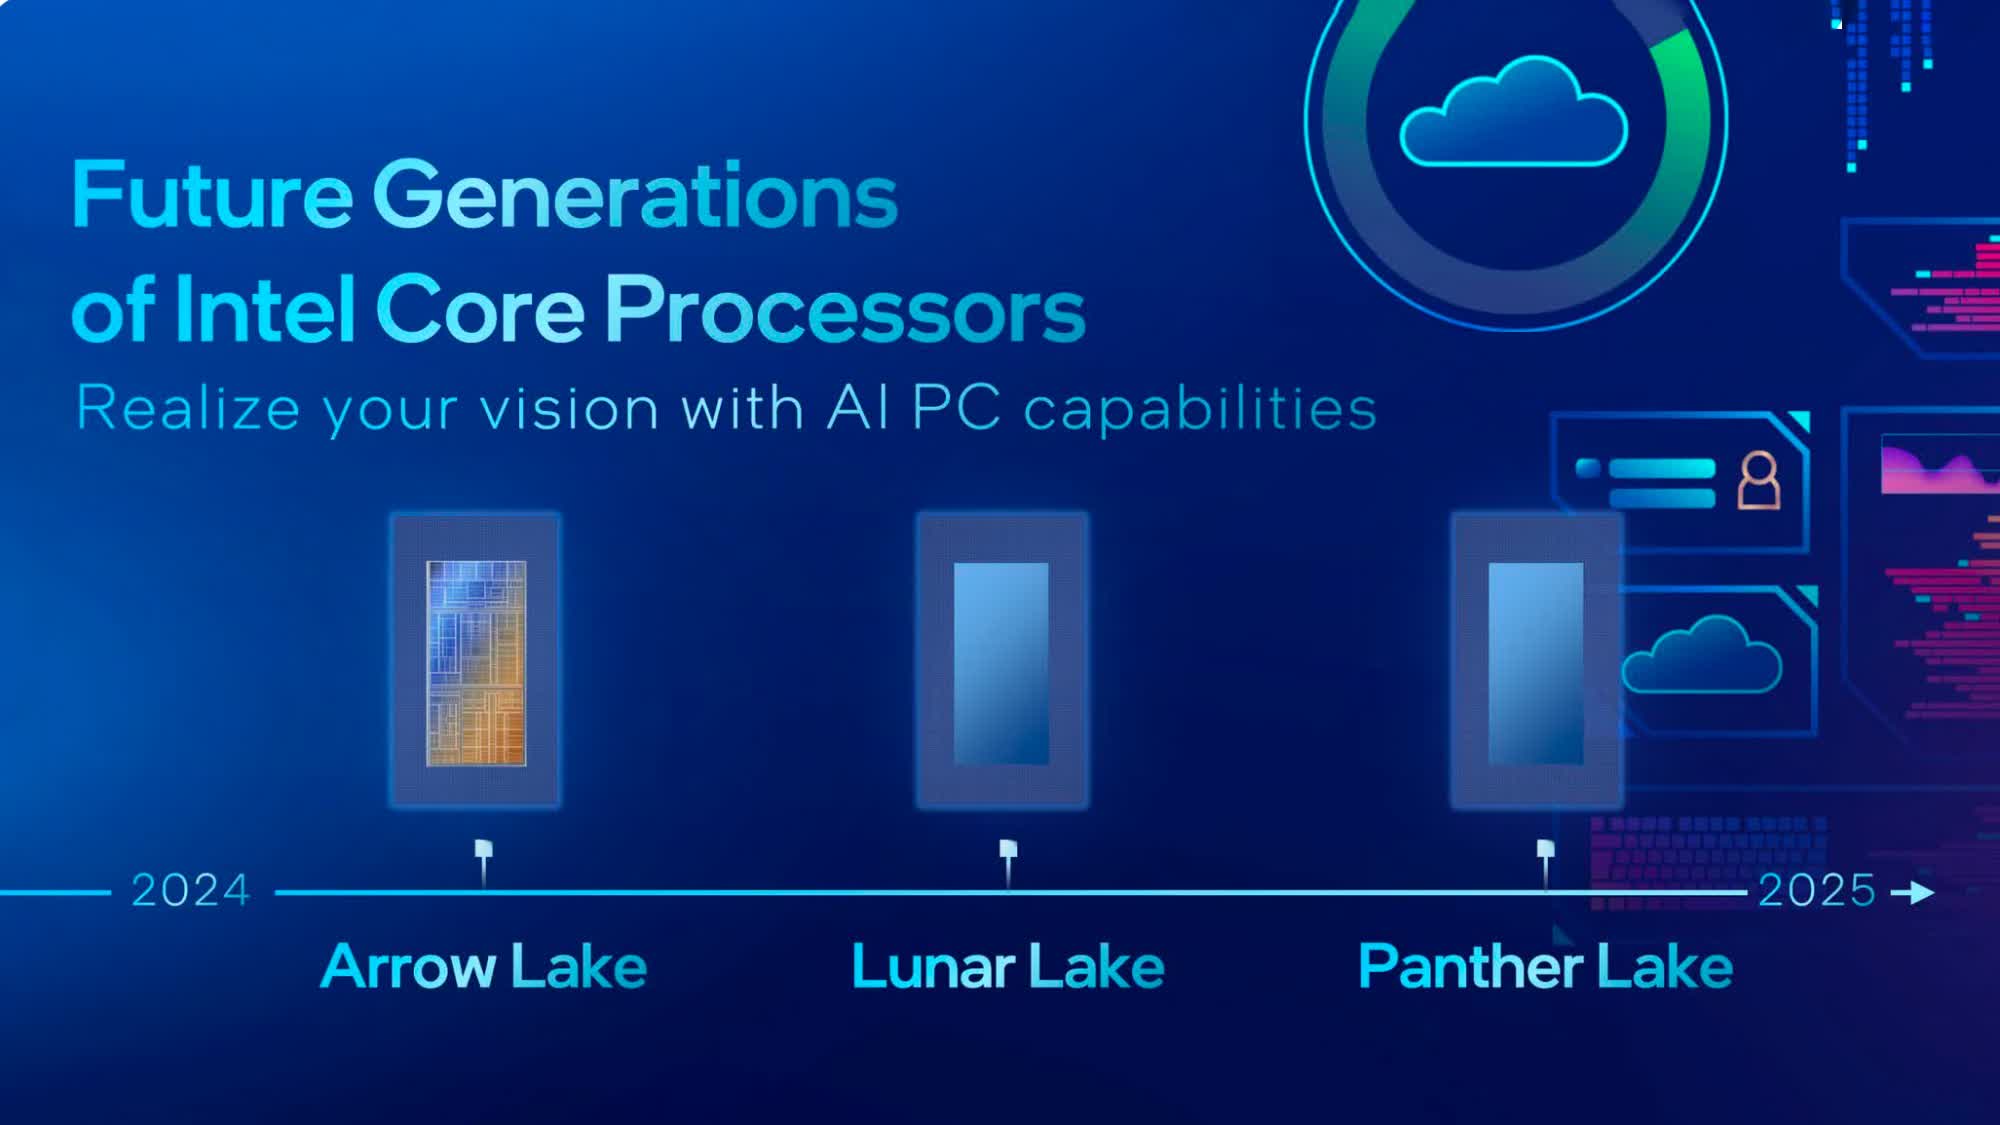 Intel says major AI boost is coming in Panther Lake CPUs, on top of Arrow and Lunar Lake chip improvements